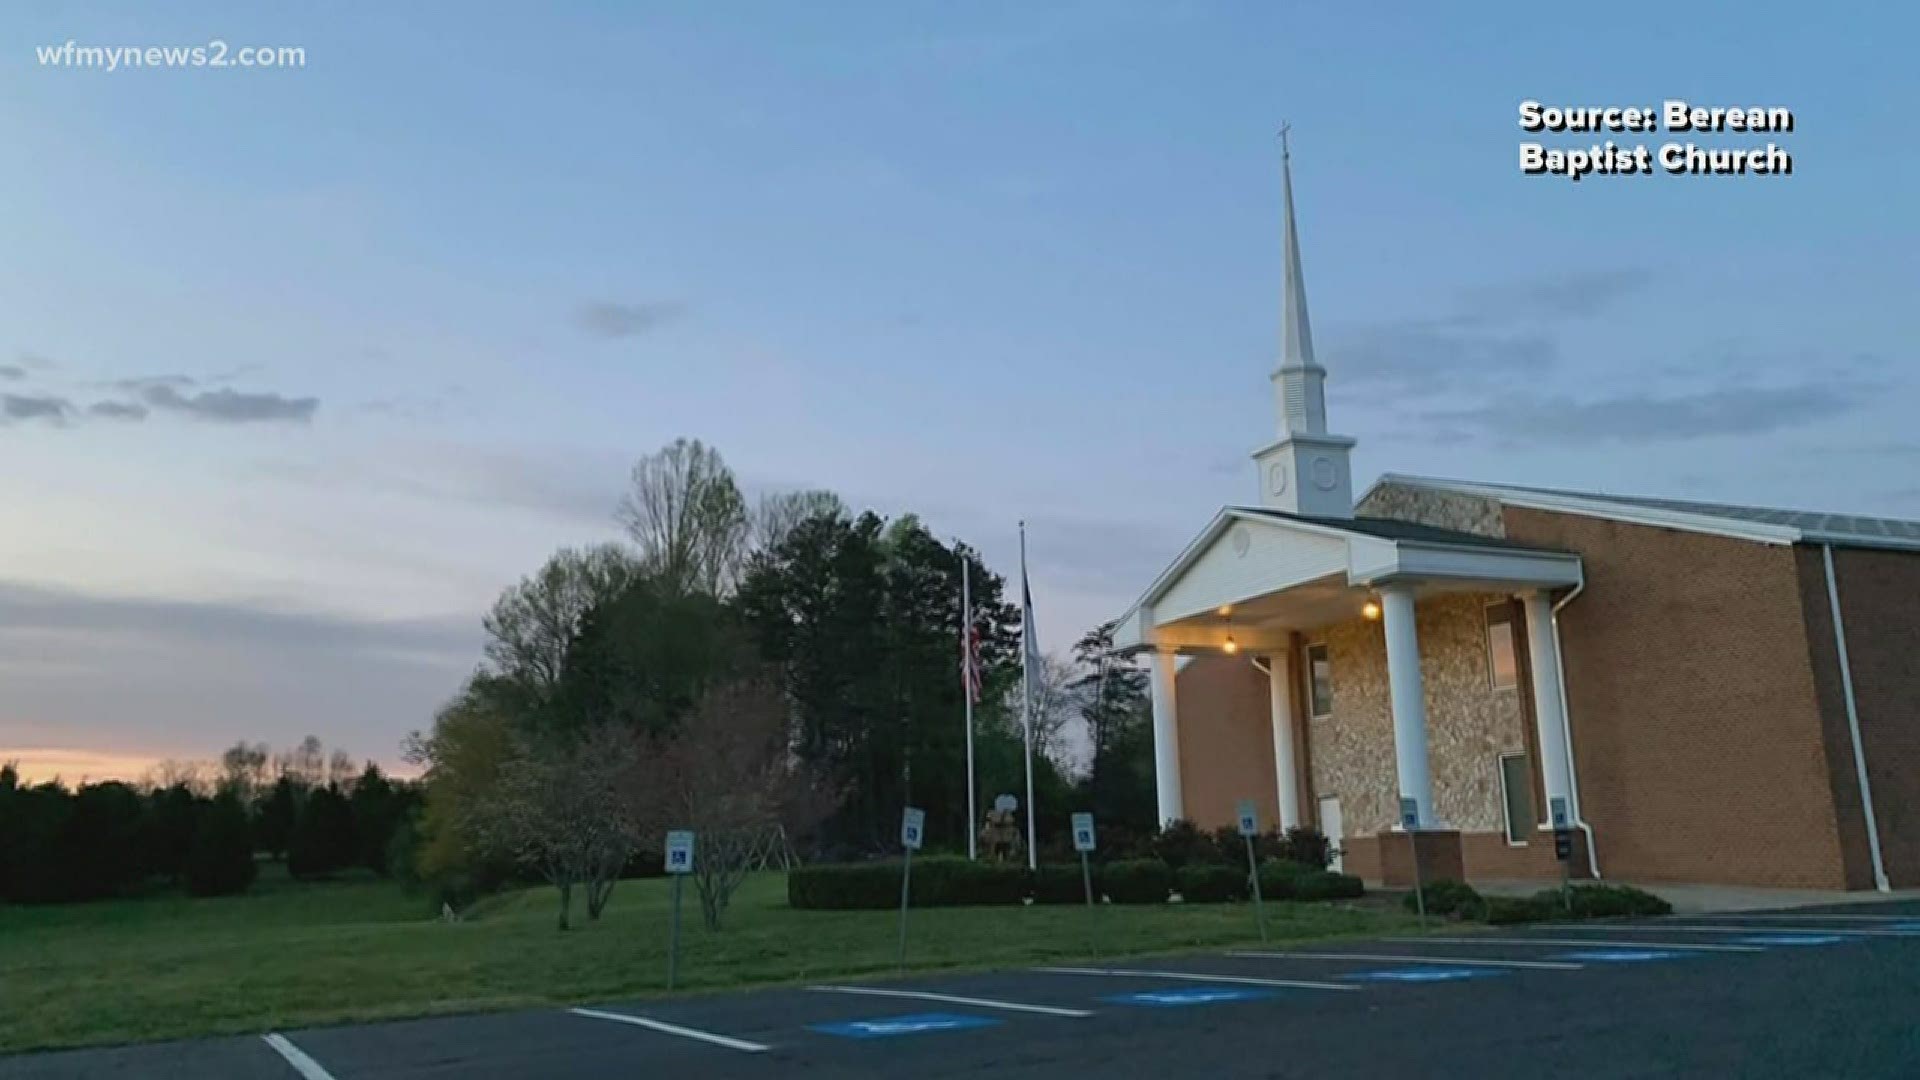 Churches can now hold indoor services if they choose to. This week a Triad pastor filed a lawsuit to allow churches to gather in person.